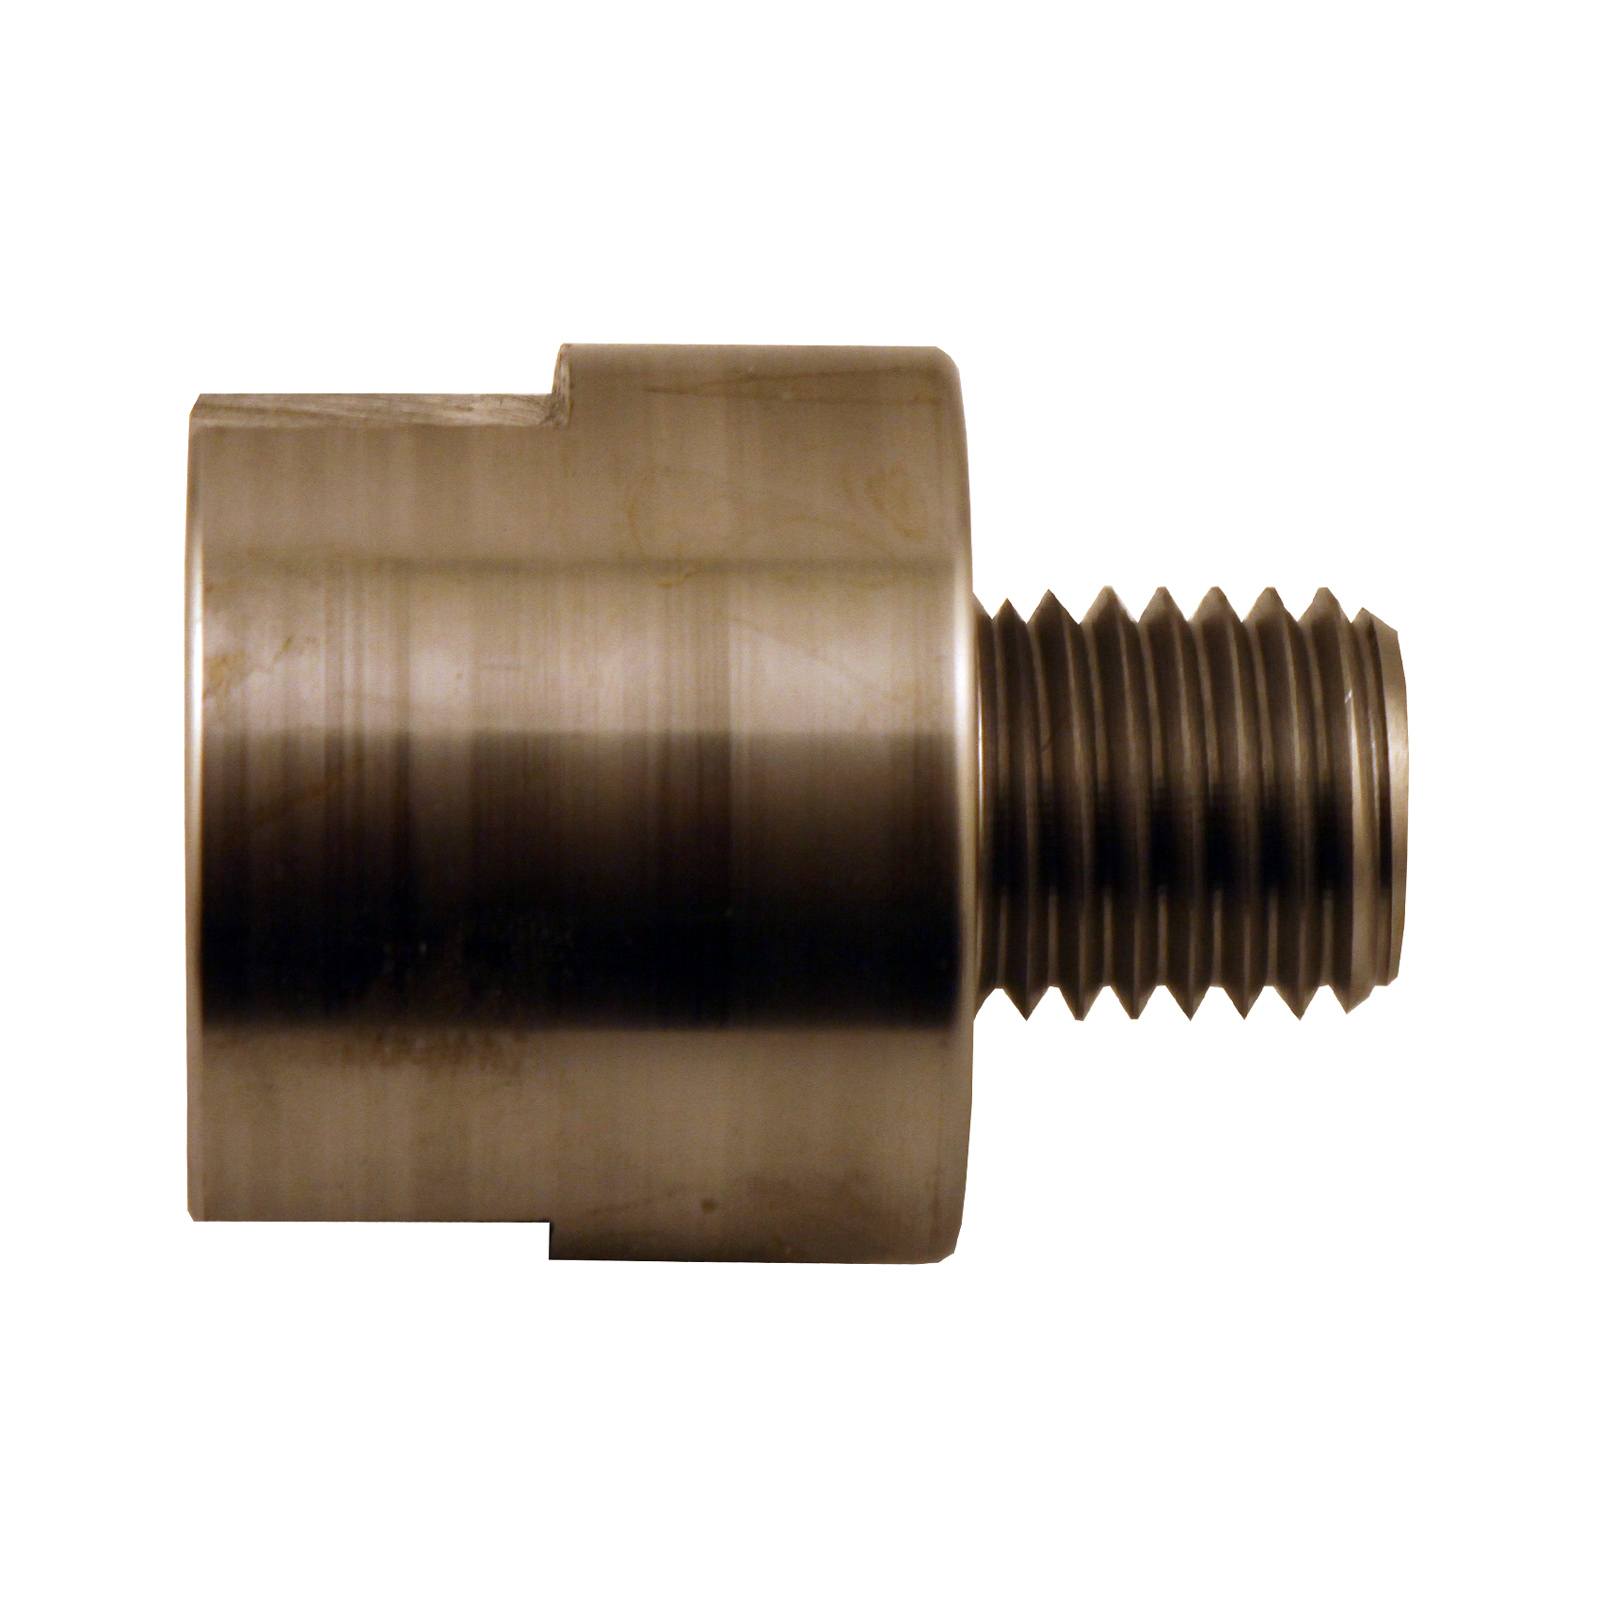 RDGTOOLS 10MM ADAPTOR SCREWED 14MM X 1 TPI TO FIT PULTRA LATHE 